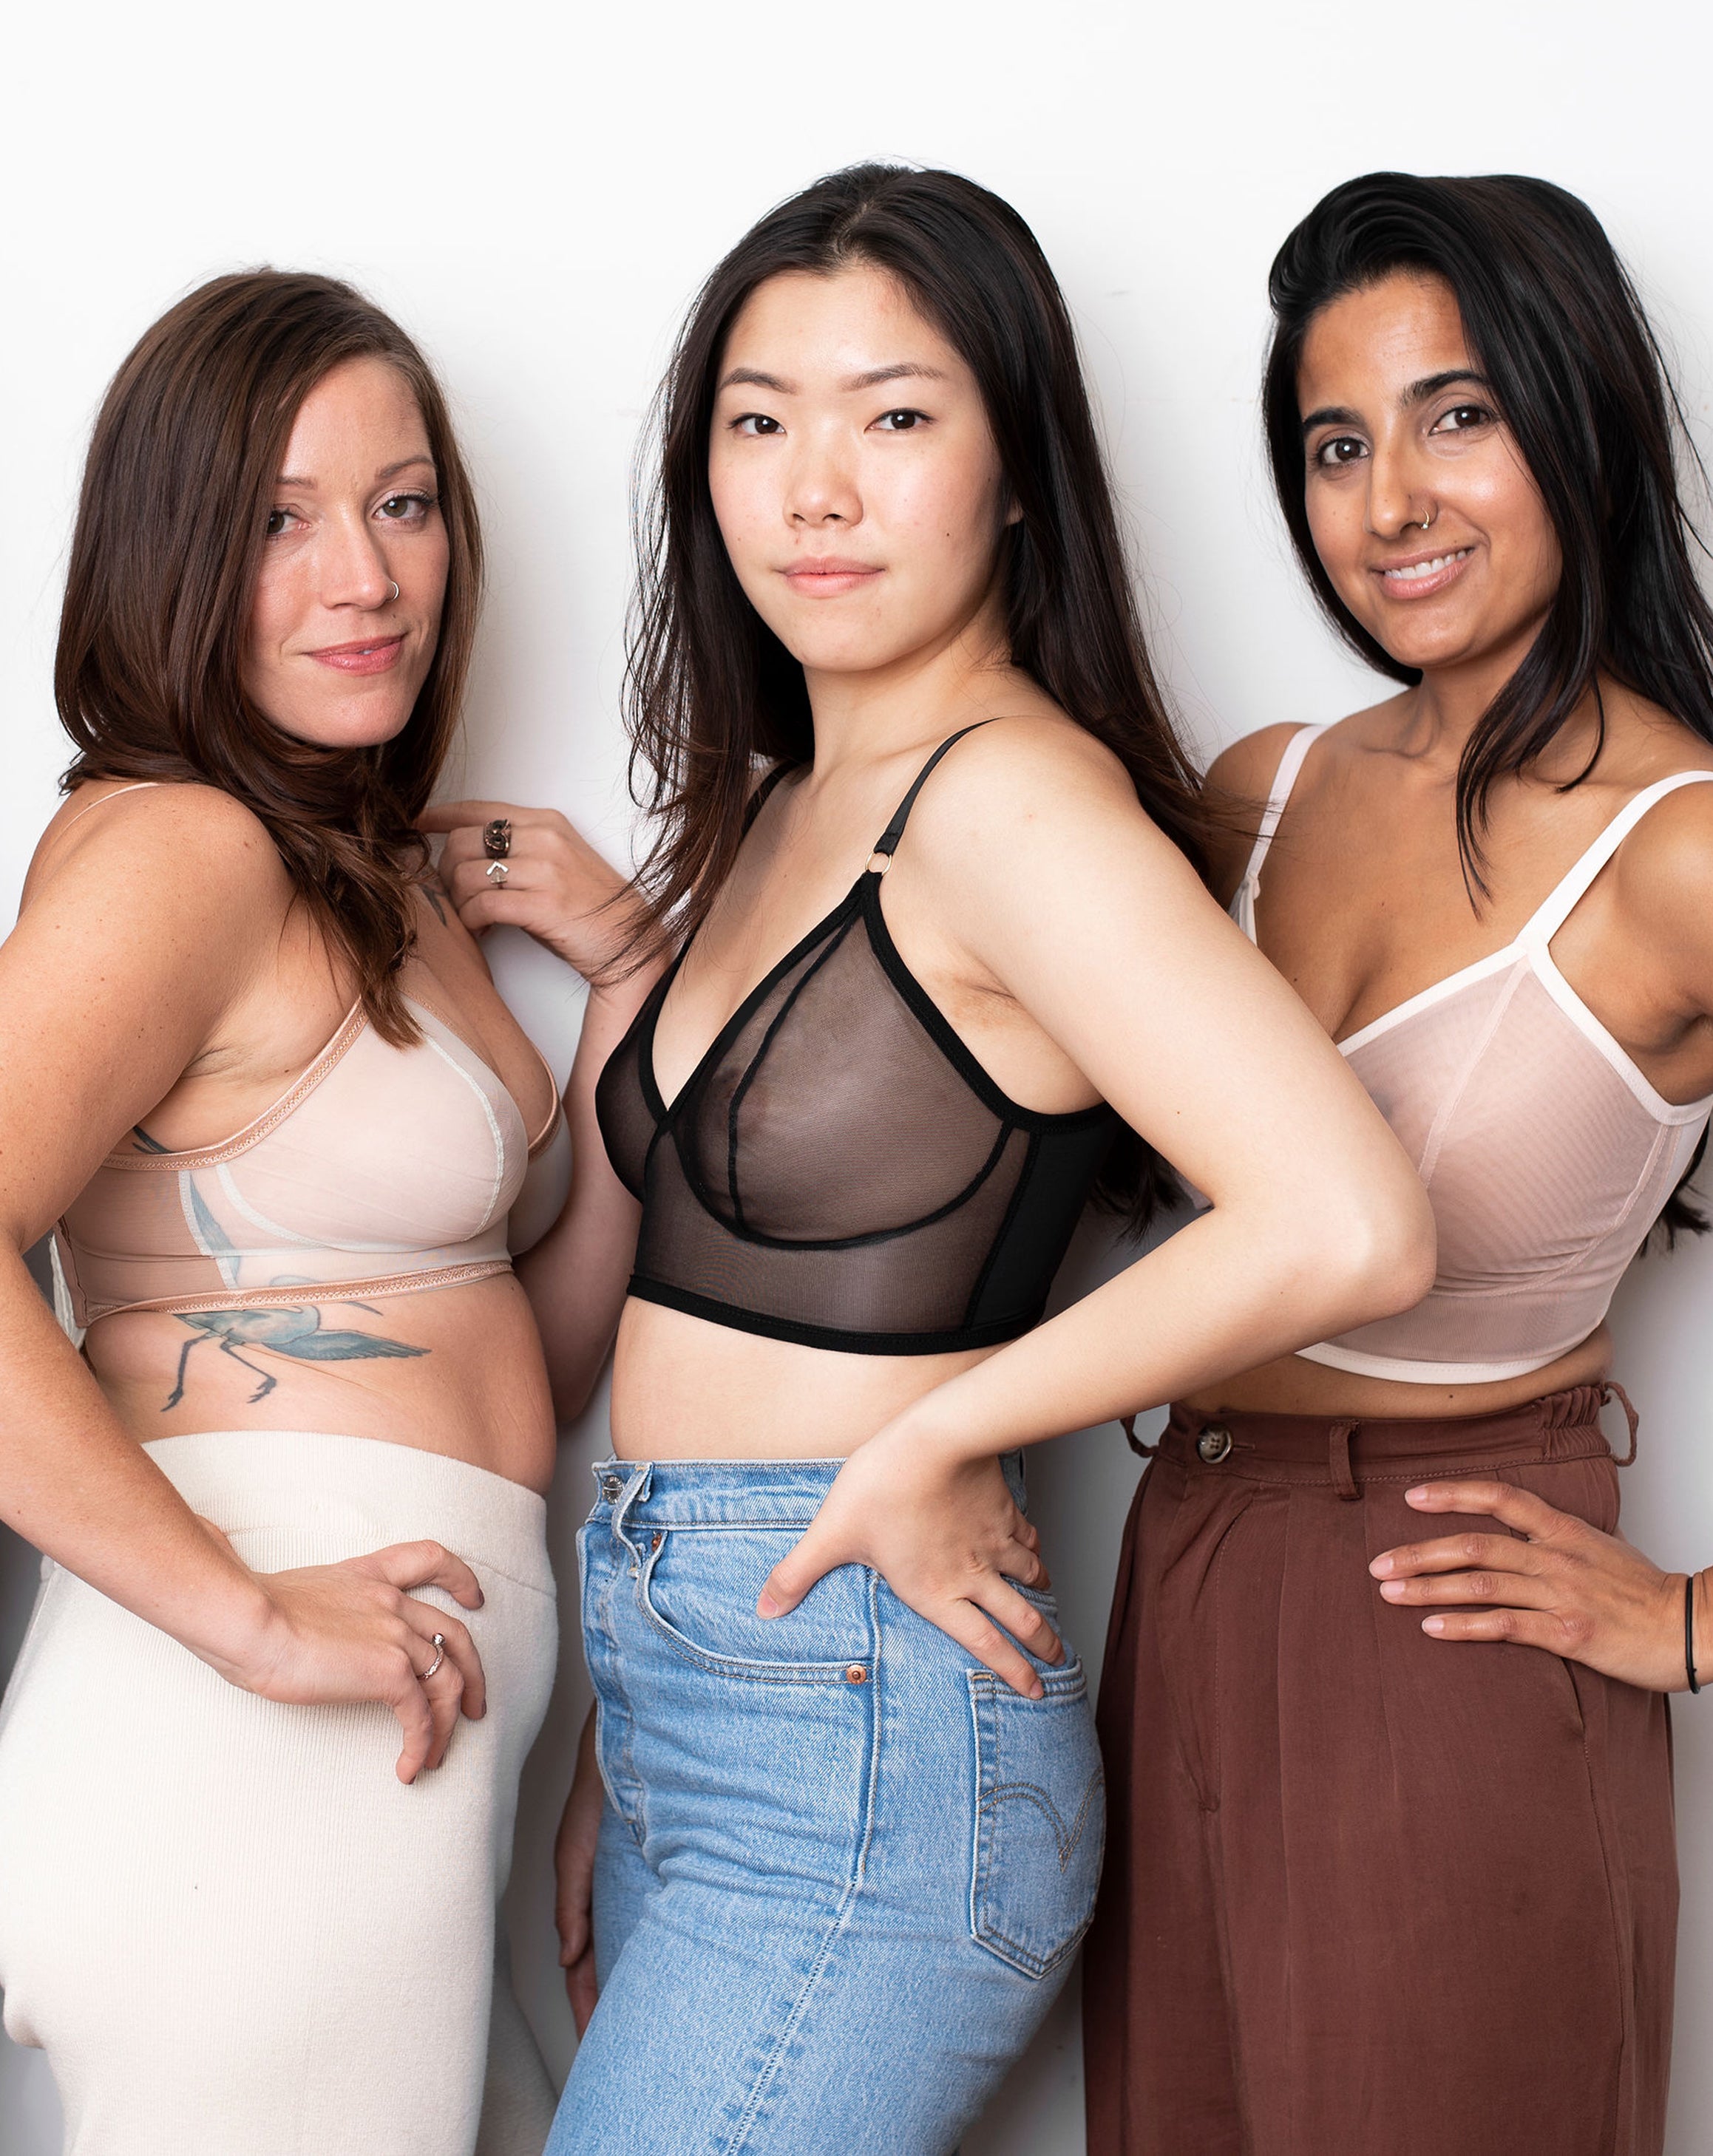 A $600 'censor bar' bikini exists and it barely covers your nipples -  PopBuzz